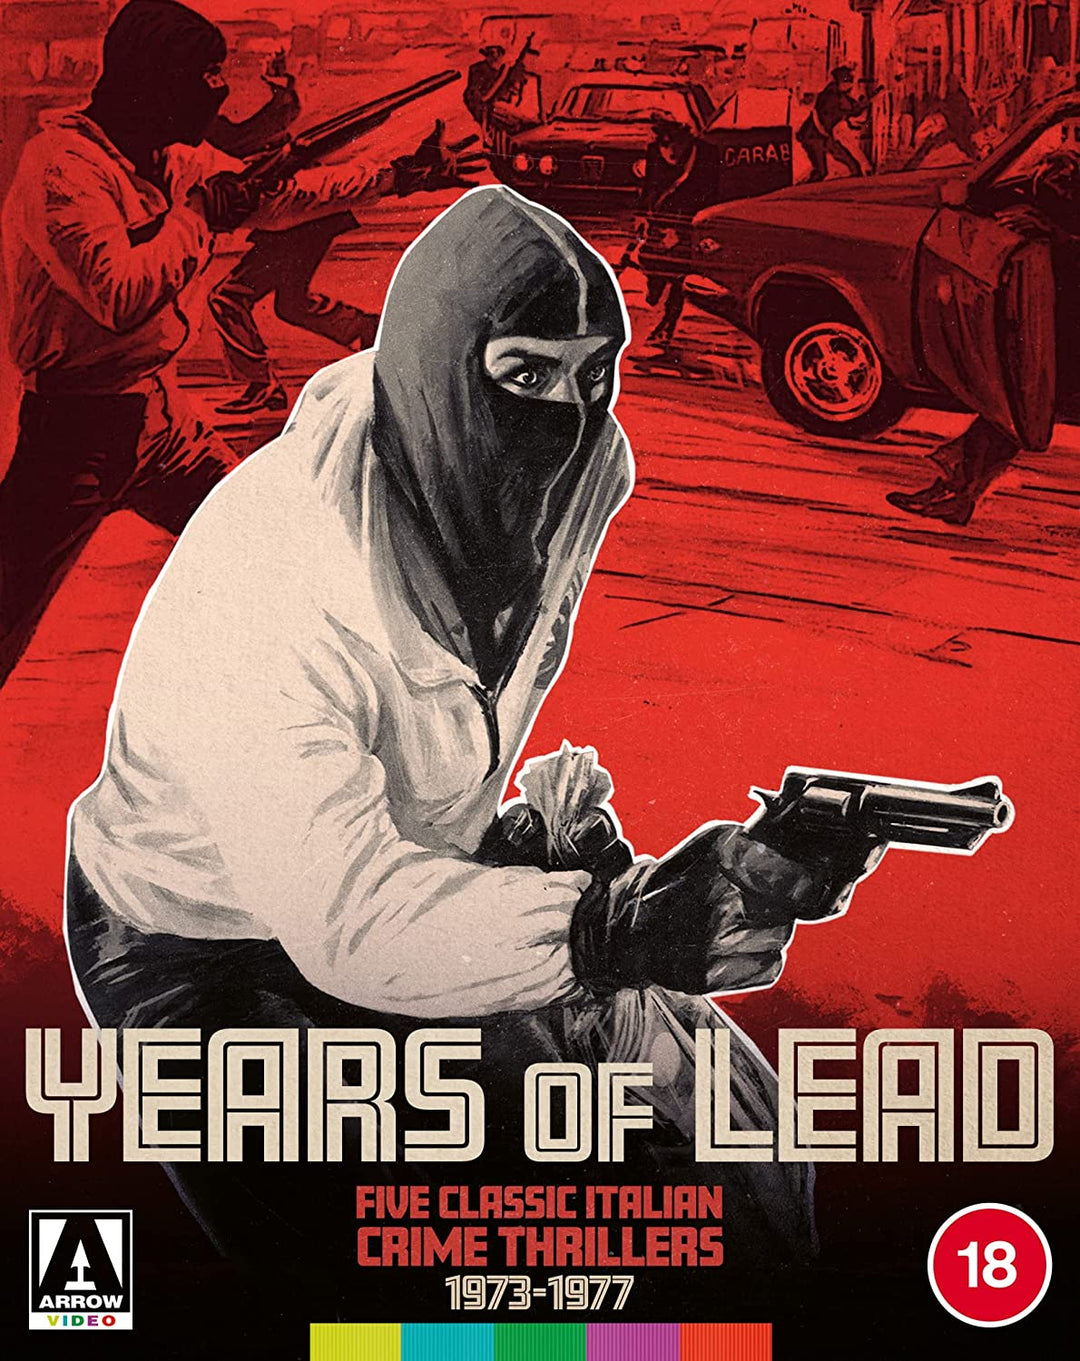 Years of Lead: Five Classic Italian Crime Thrillers 1973-1977 [Standard Edition] [Blu-ray]